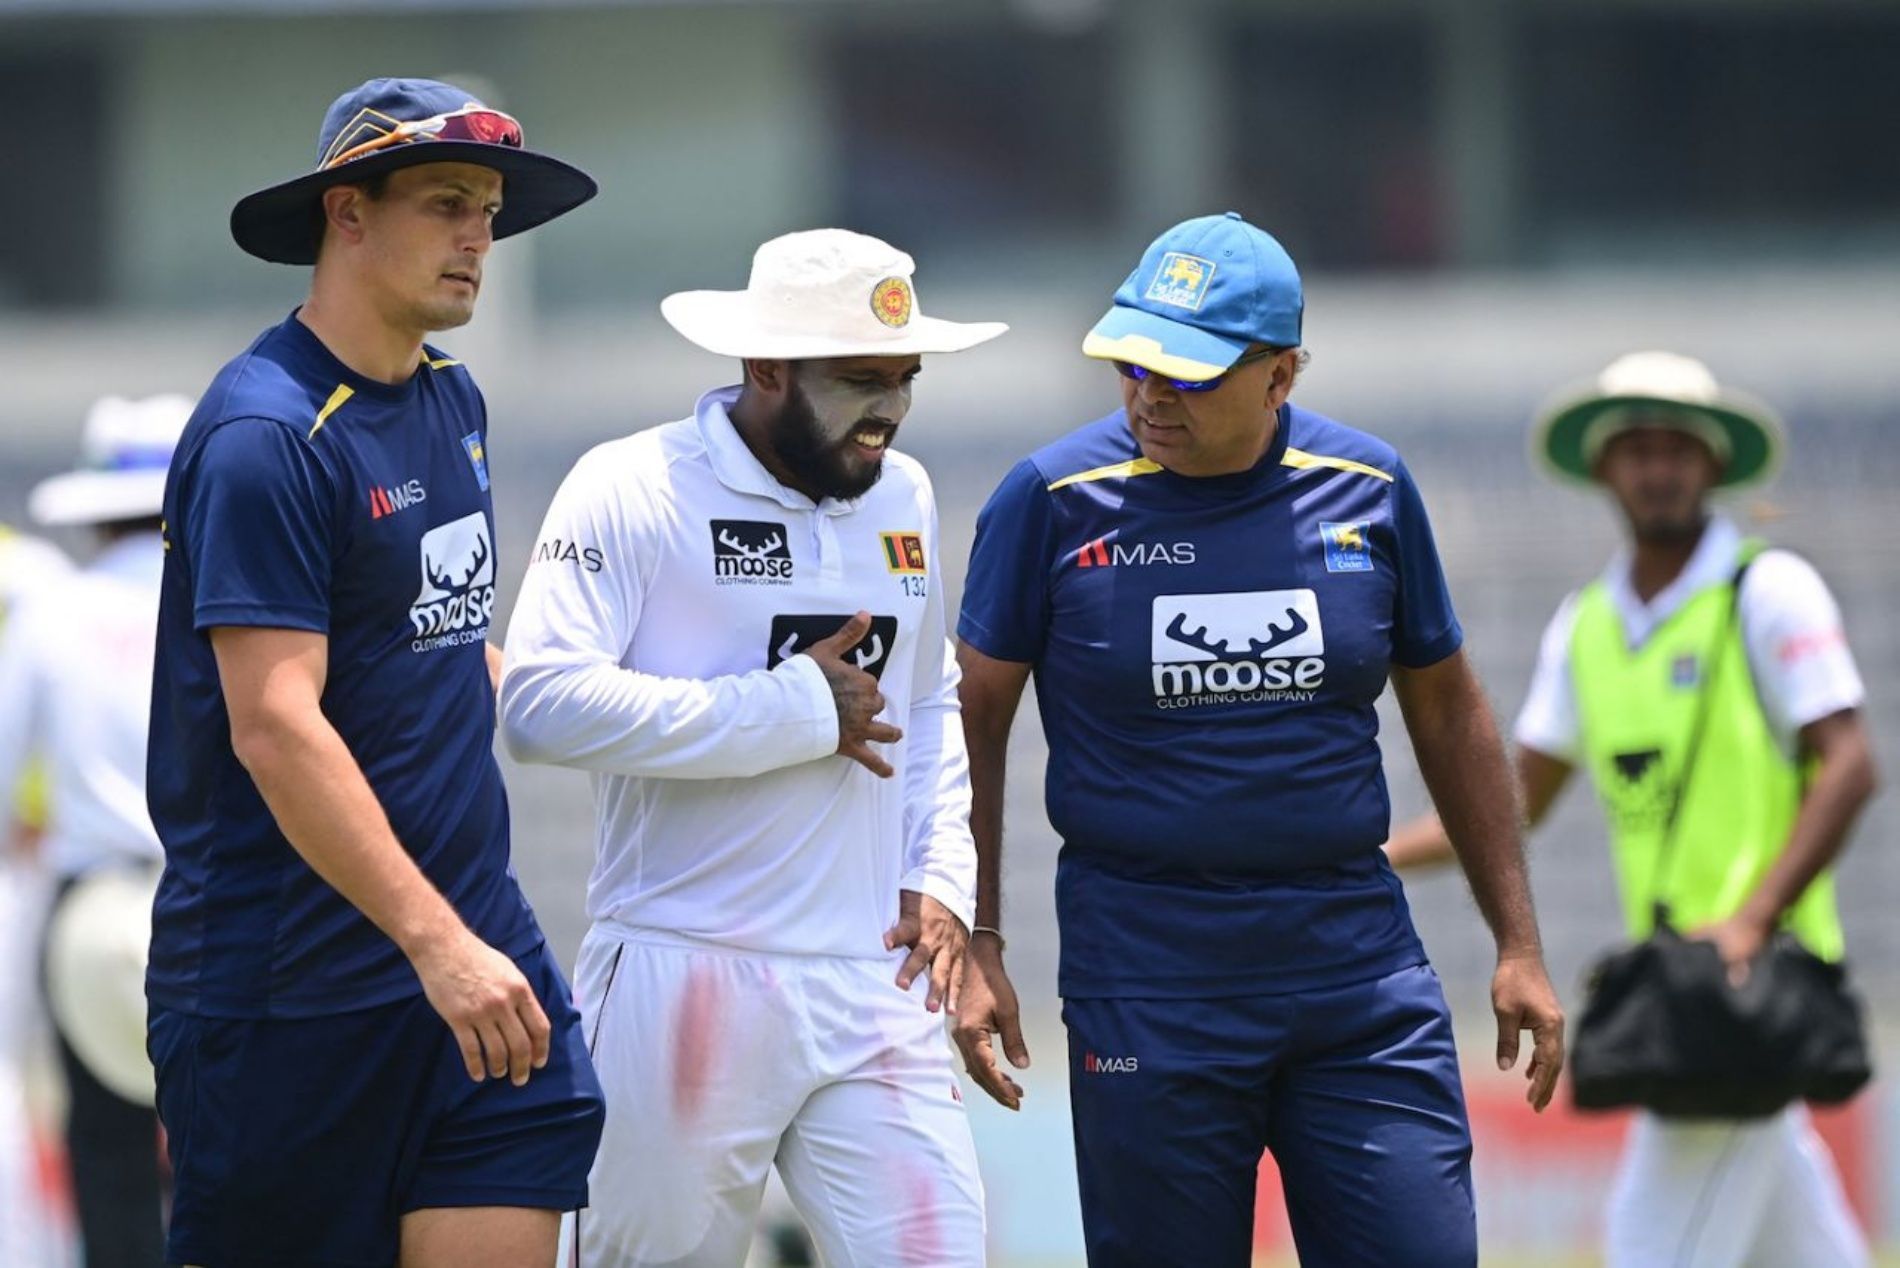 Kusal Mendis leaves the field after complaining of chest pain. Pic: Twitter